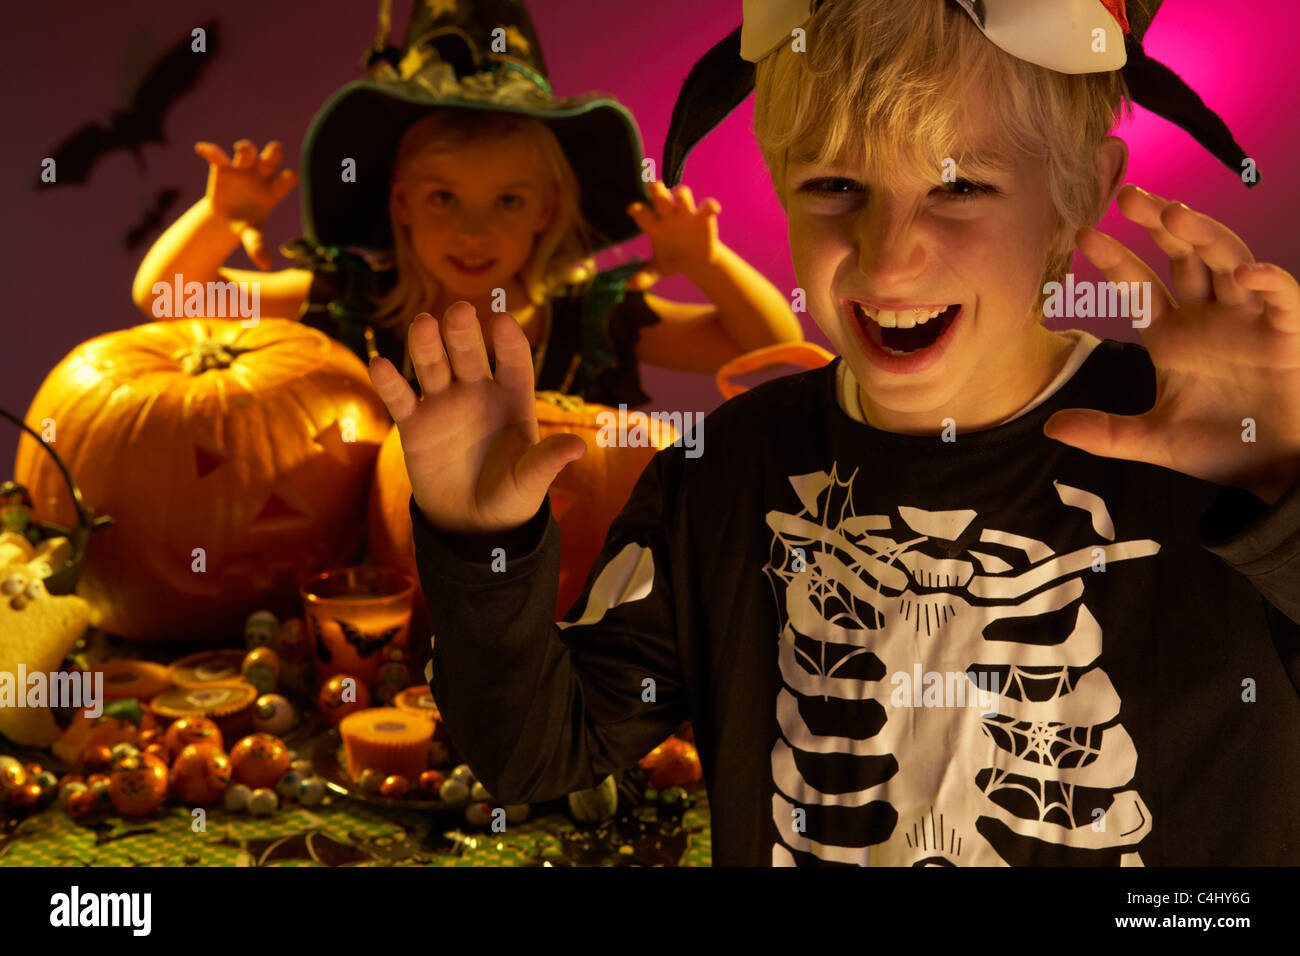 Halloween party with children wearing scaring costumes Stock Photo